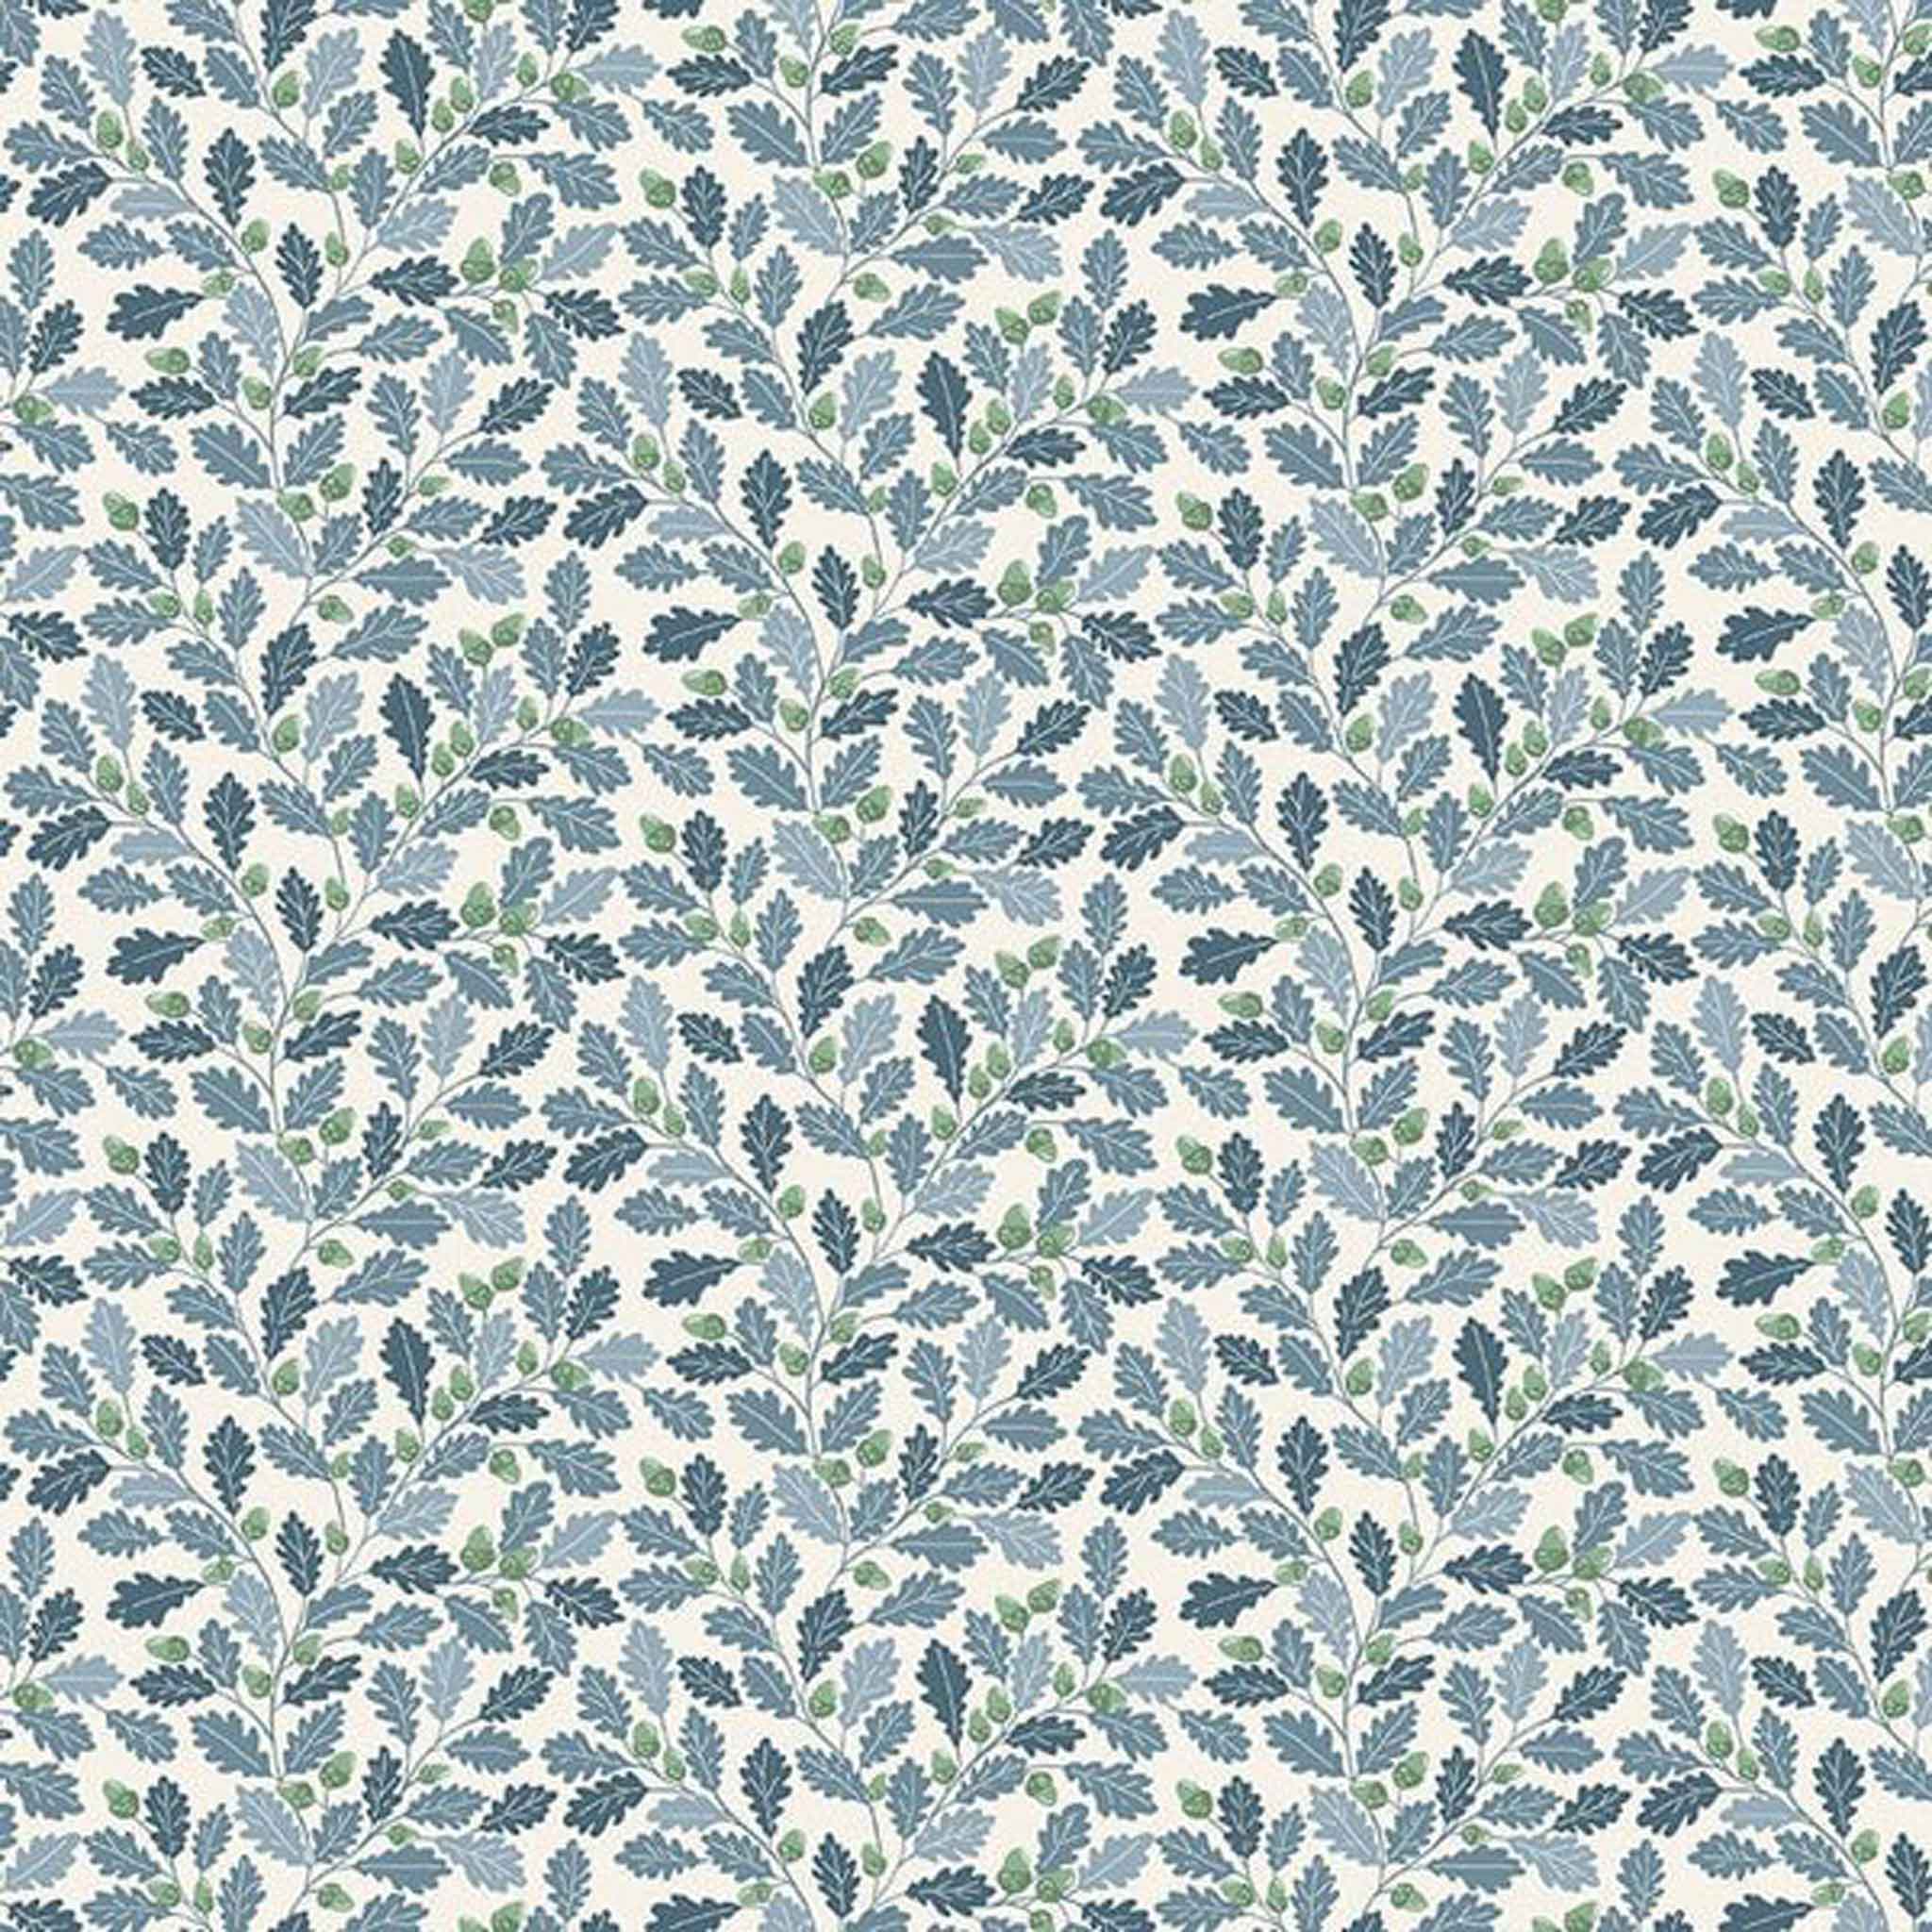 Blue Oak Leaves Cotton Fabric - Makower 2532/B - Heather and Sage Collection